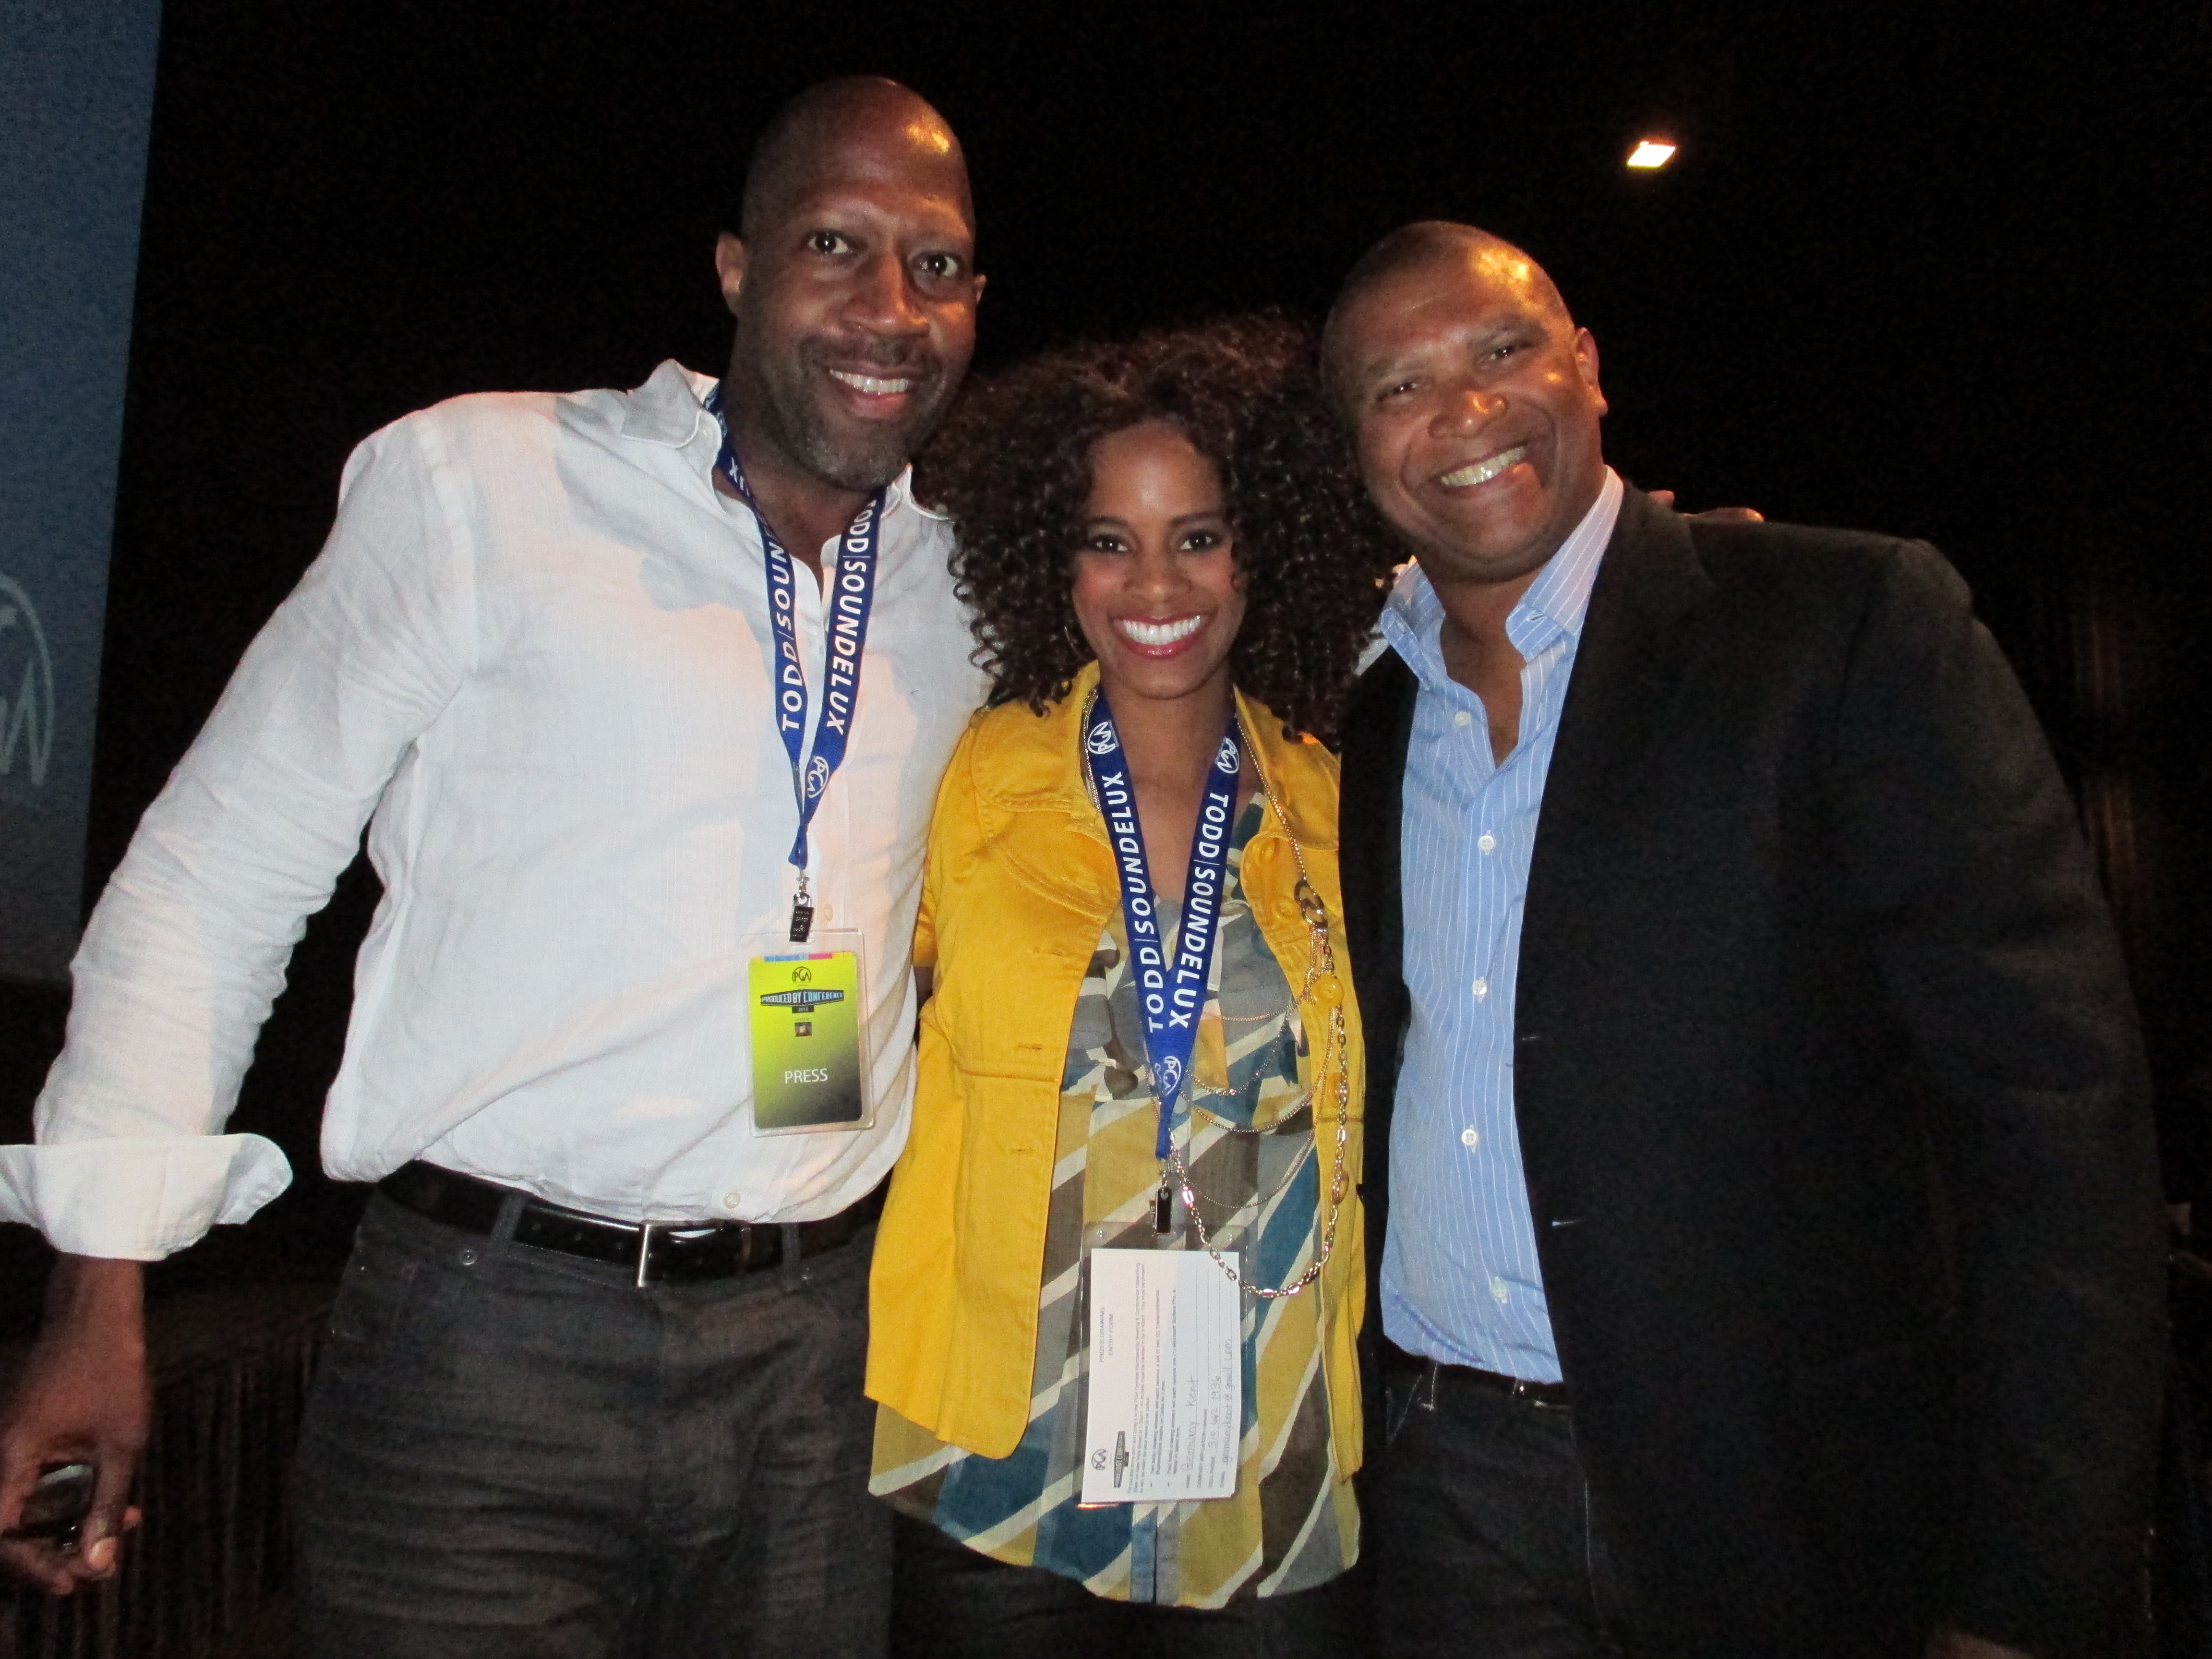 Actress Germany Kent with Producer/Director Darryl Pitts and Django Unchained Producer Reginald Hudlin